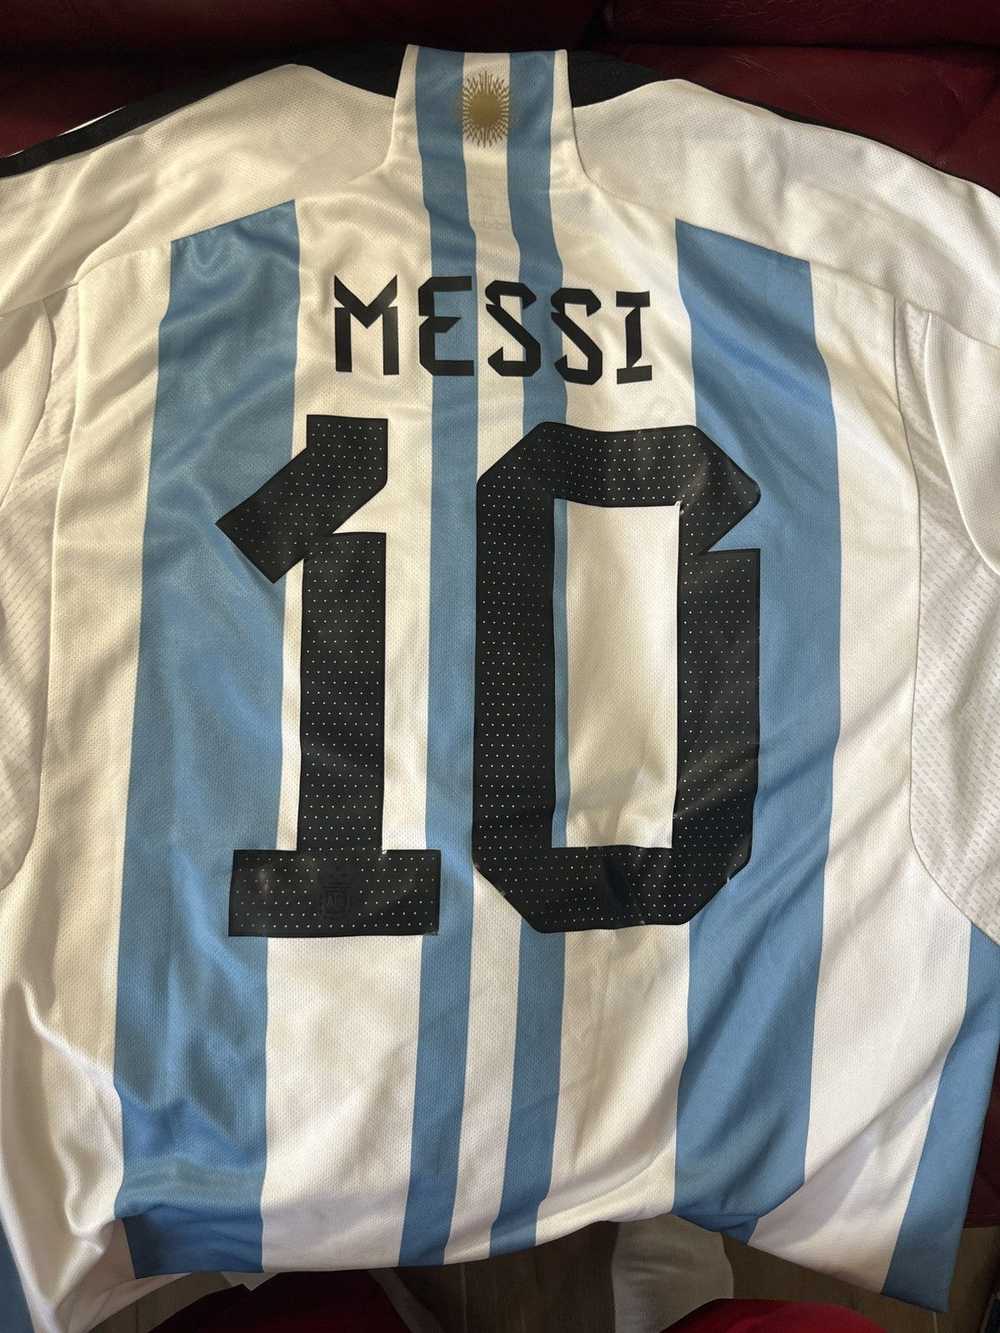 Adidas Argentina Messi 3x World Cup Jersey - image 1